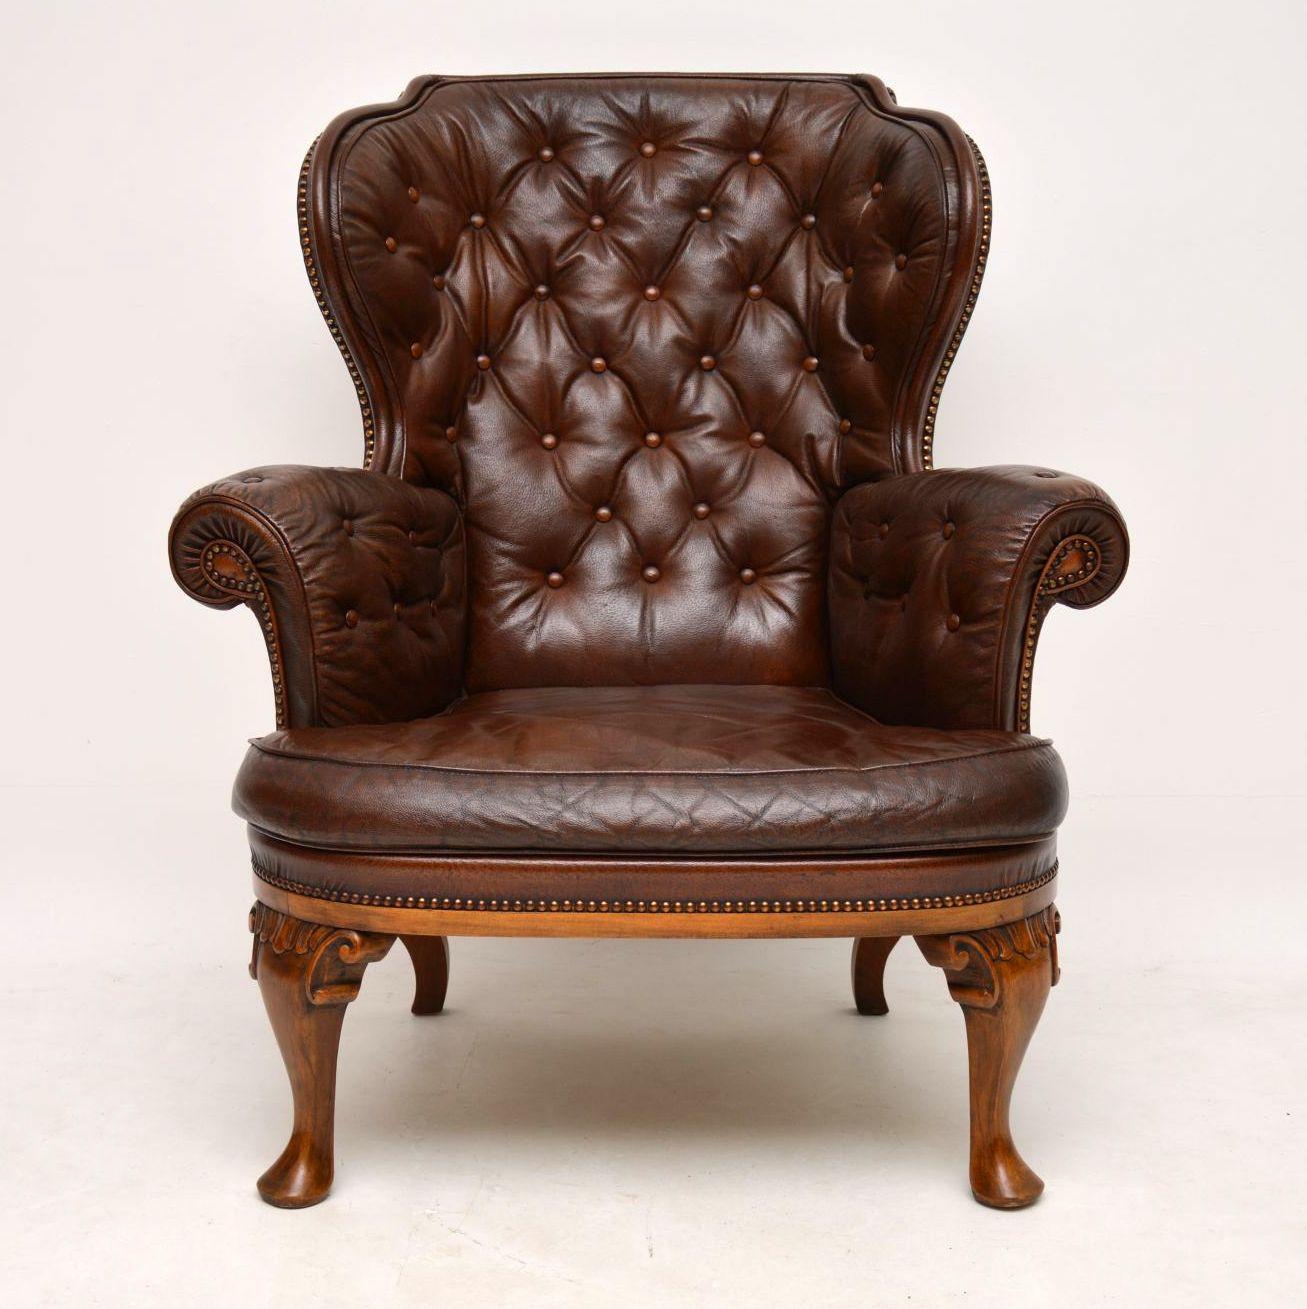 This antique Swedish leather wing armchair has a fabulous shape and is very comfortable, helped by the sloping back and head support. The inside leather is deep buttoned and it has a loose cushion. The leather is naturally aged and I particularly